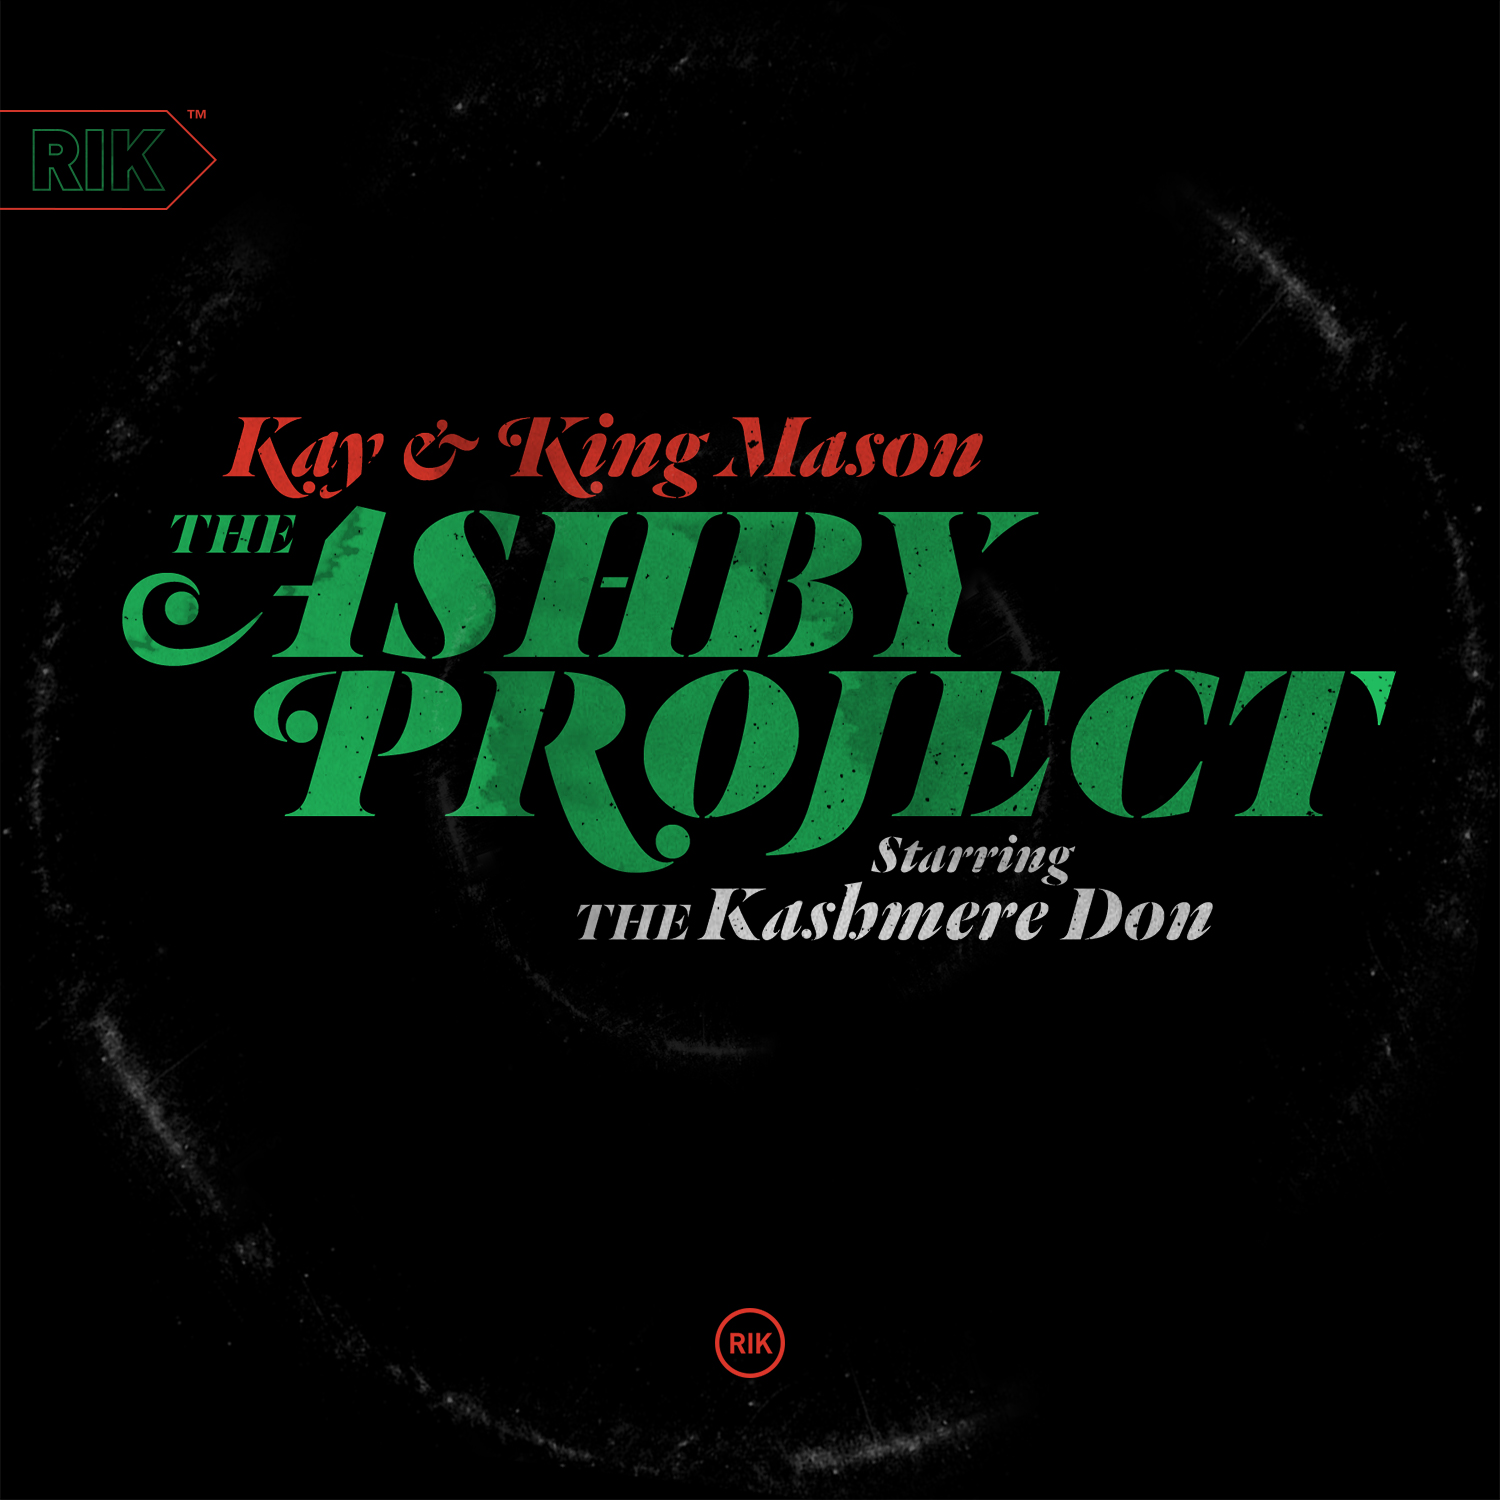 Kay & King Mason — The Ashby Project starring The Kashmere Don